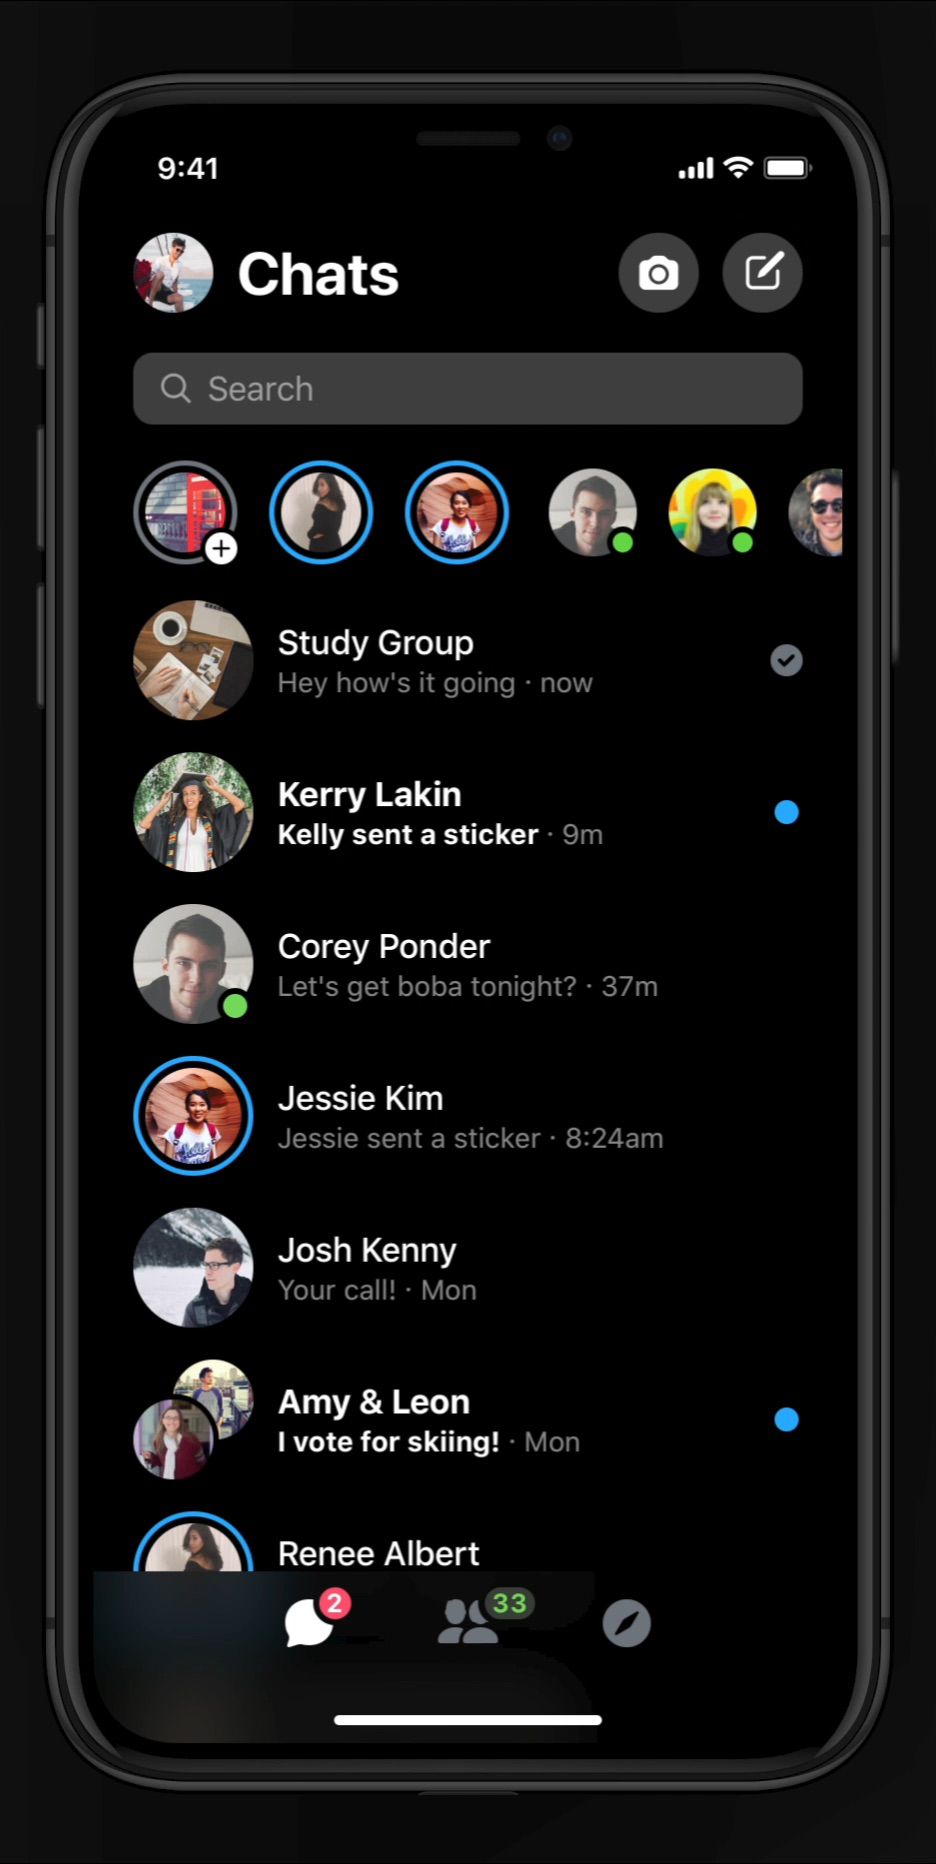 Dark Mode Now Available Globally in Facebook Messenger